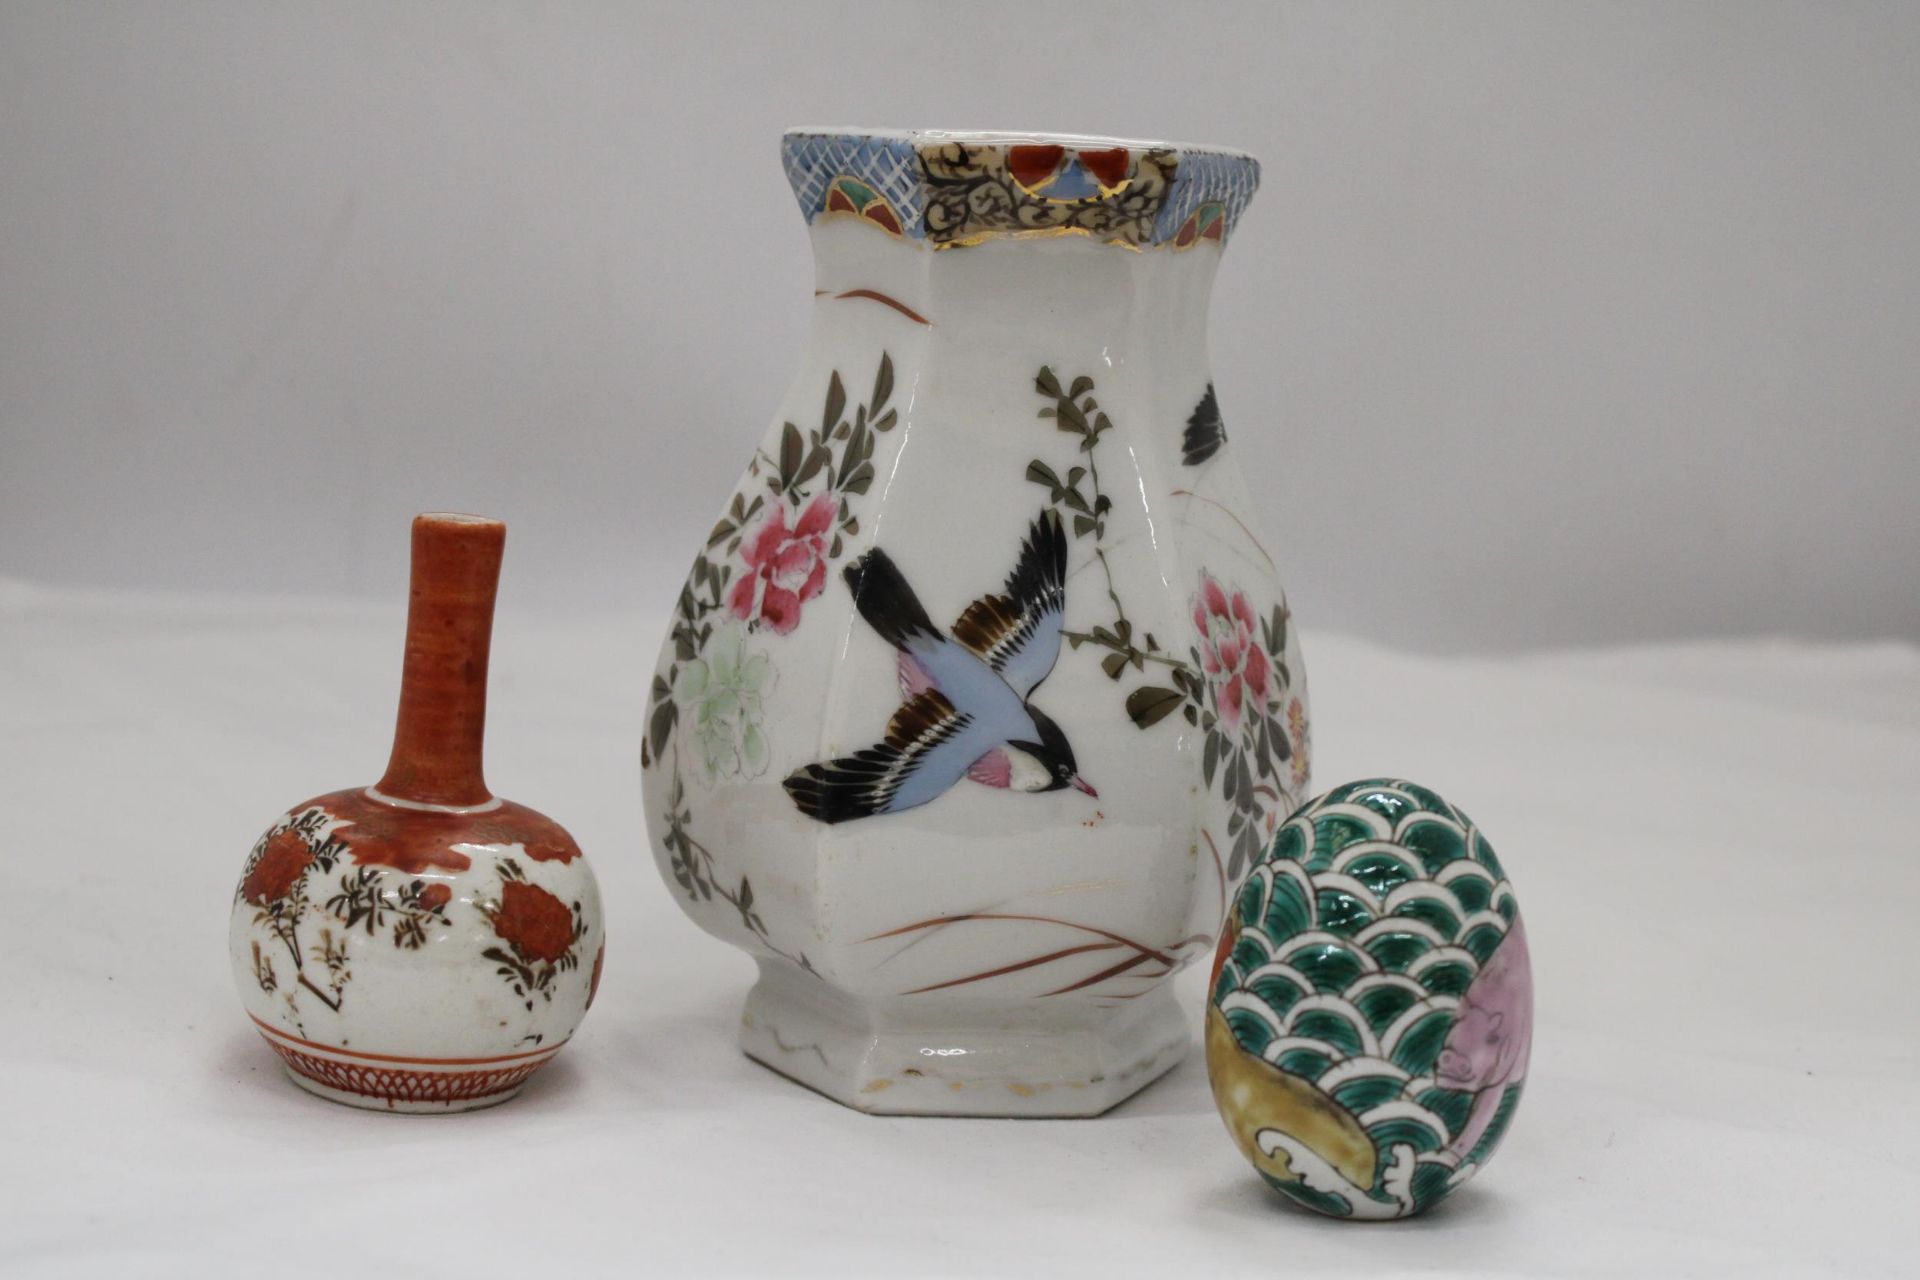 AN ORIENTAL HEXAGONAL VASE, SMALLER ORIENTAL VASE AND DECORATED EGG - Image 2 of 6